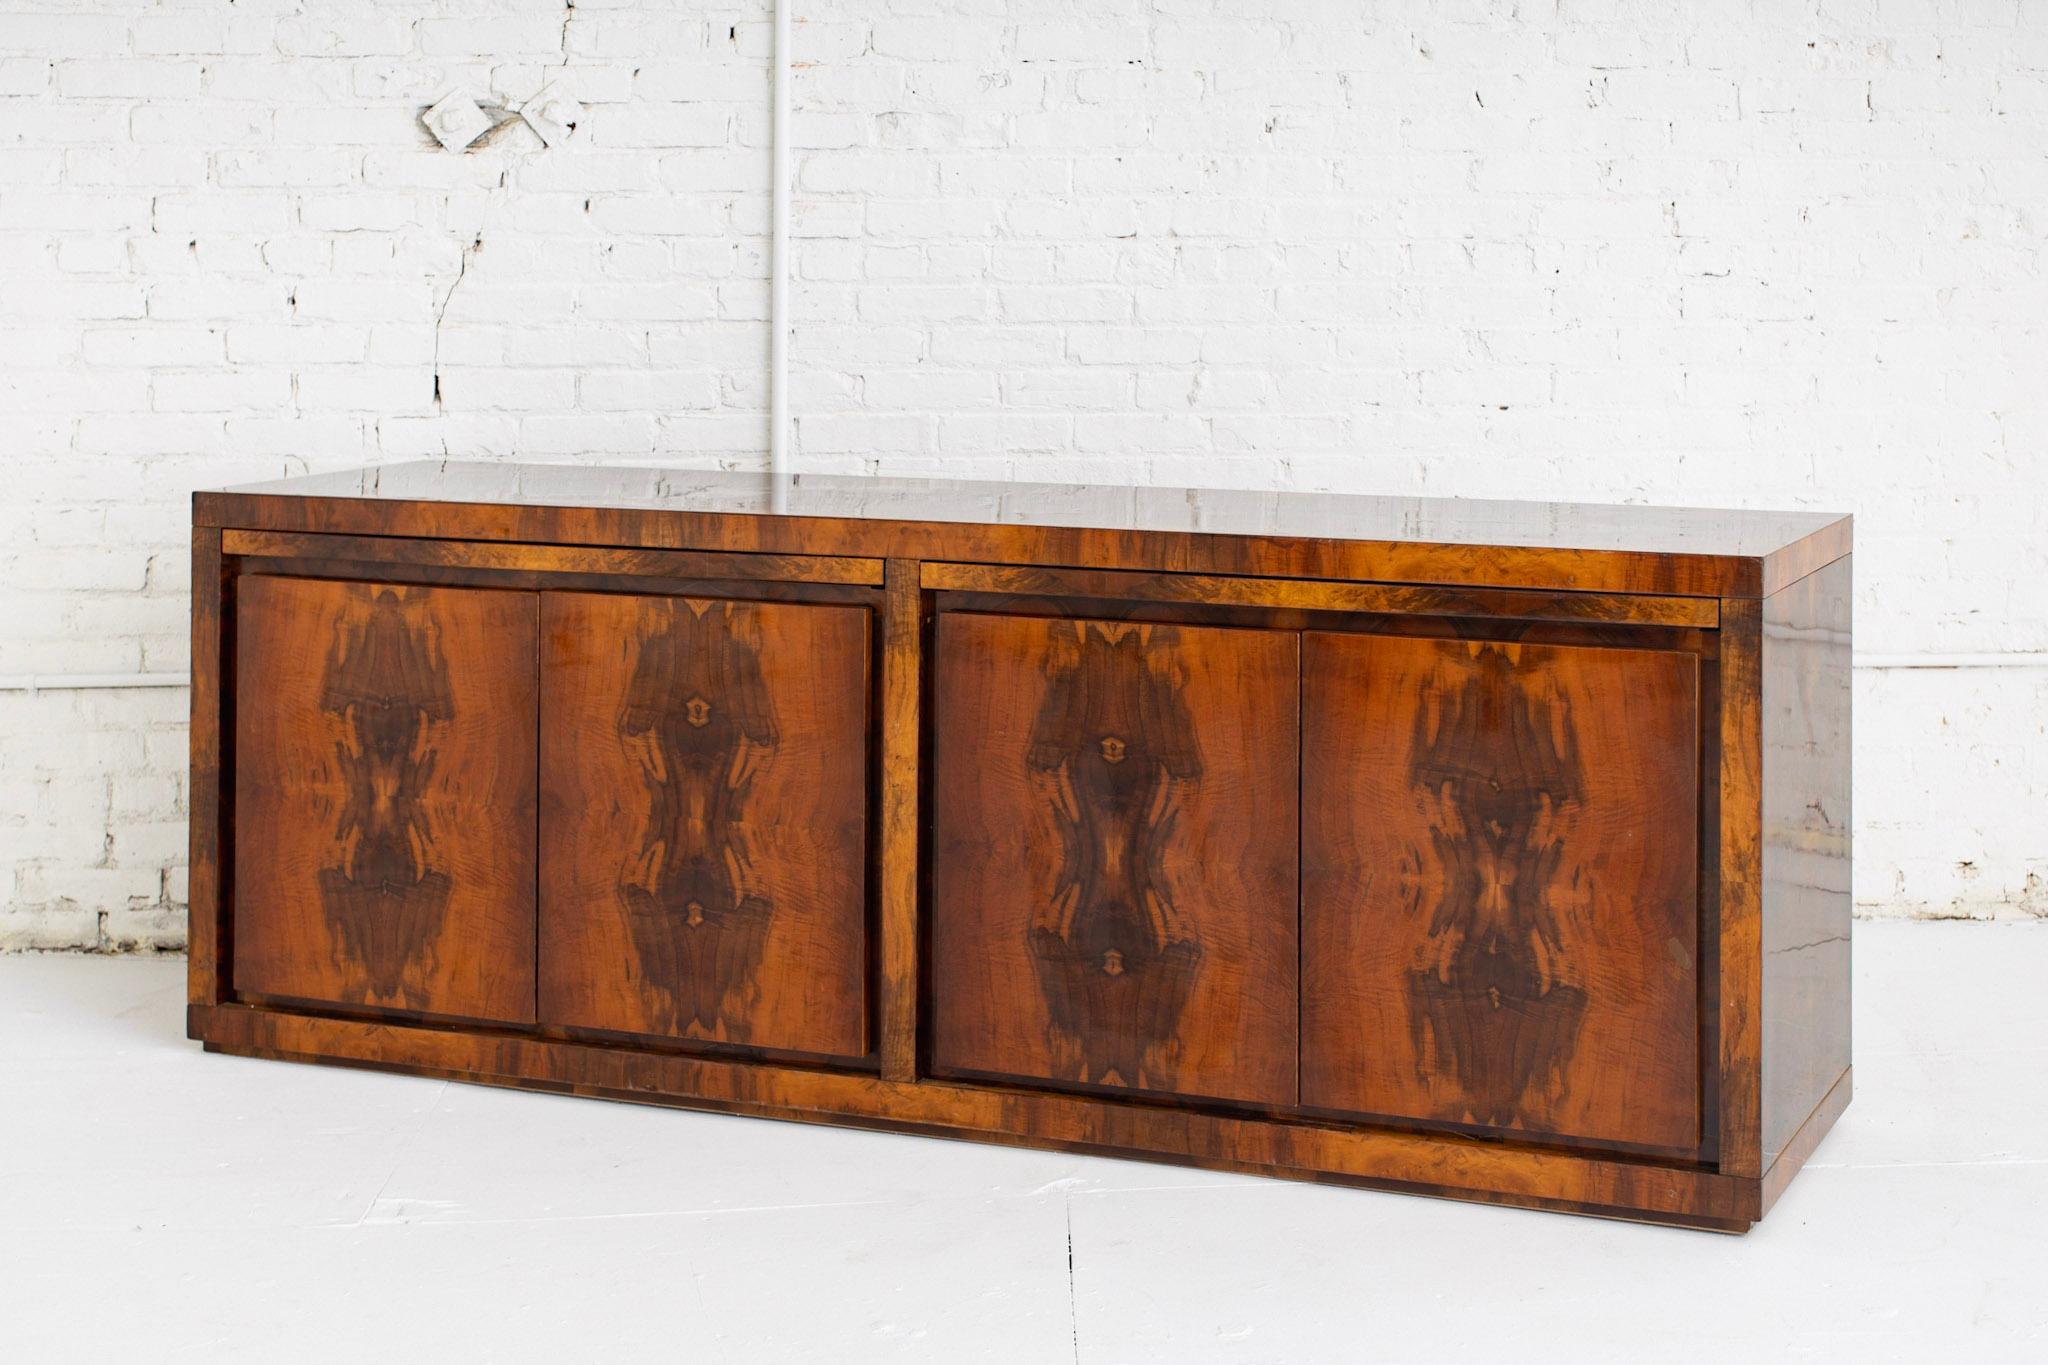 High gloss lacquered walnut burr / burl credenza. Rich grain detail creates a book-matched surface pattern throughout. 3 cabinet doors open to inner shelves. One cabinet door opens to 4 inner drawers. 2 upper extendable work / serving areas. Sourced